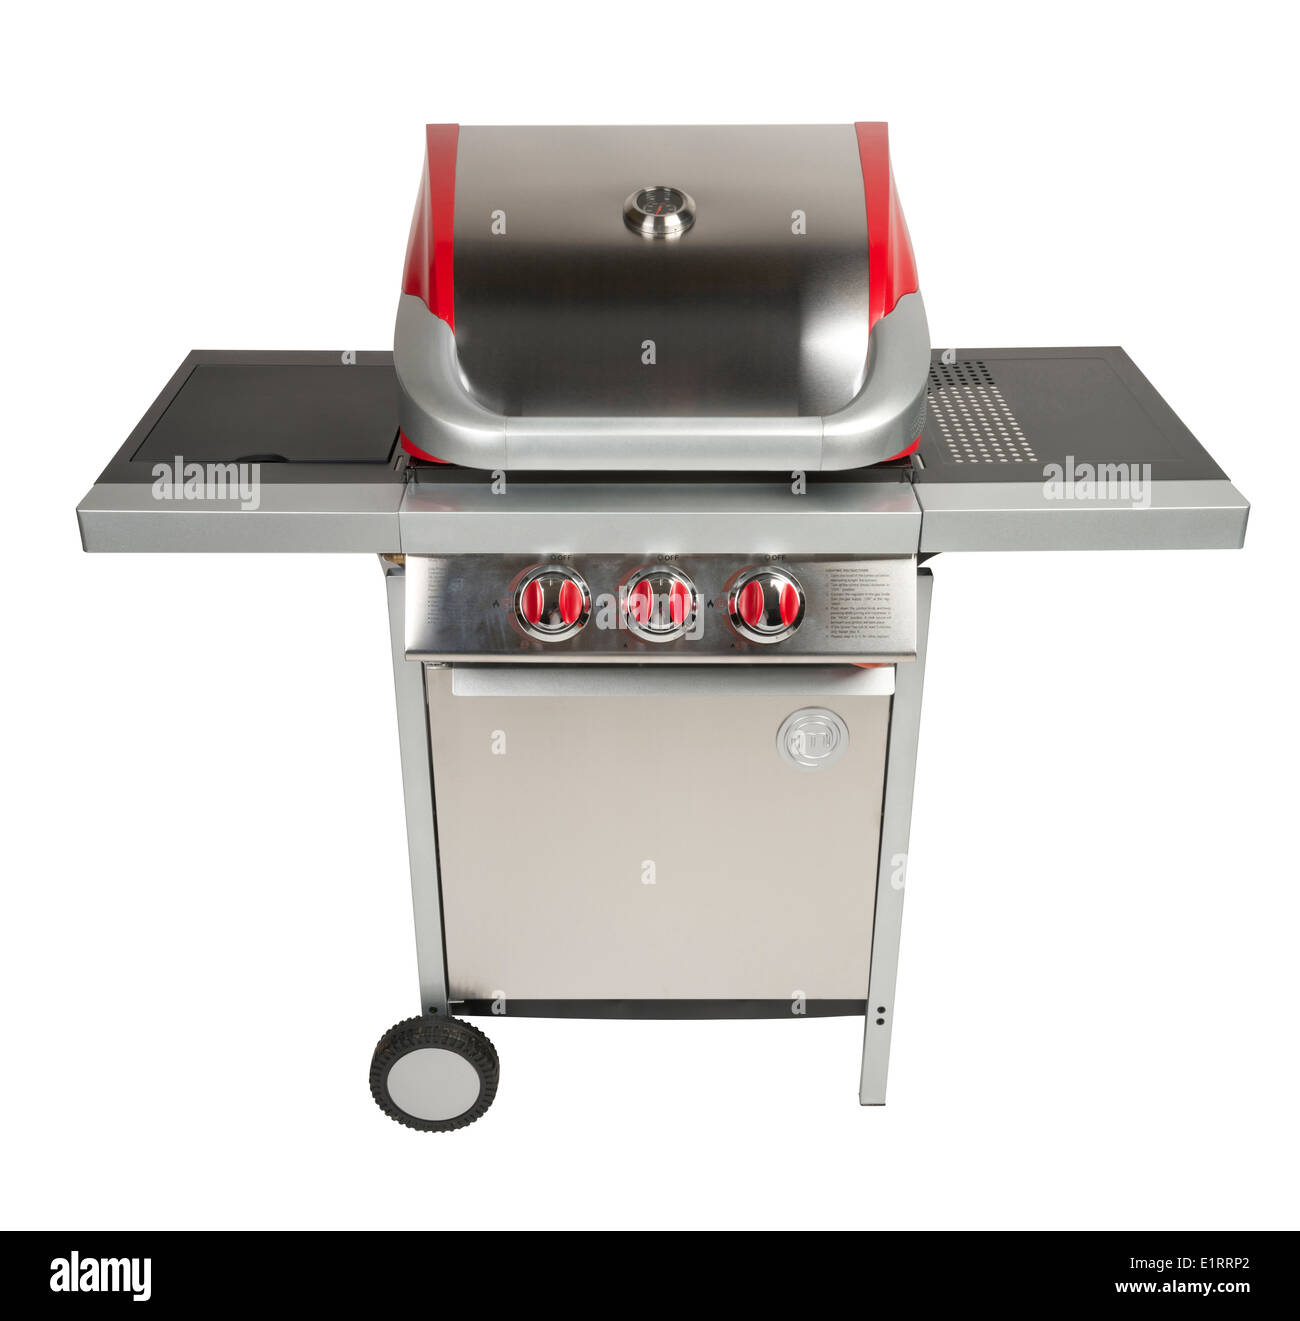 Gas barbecue or grill Stock Photo